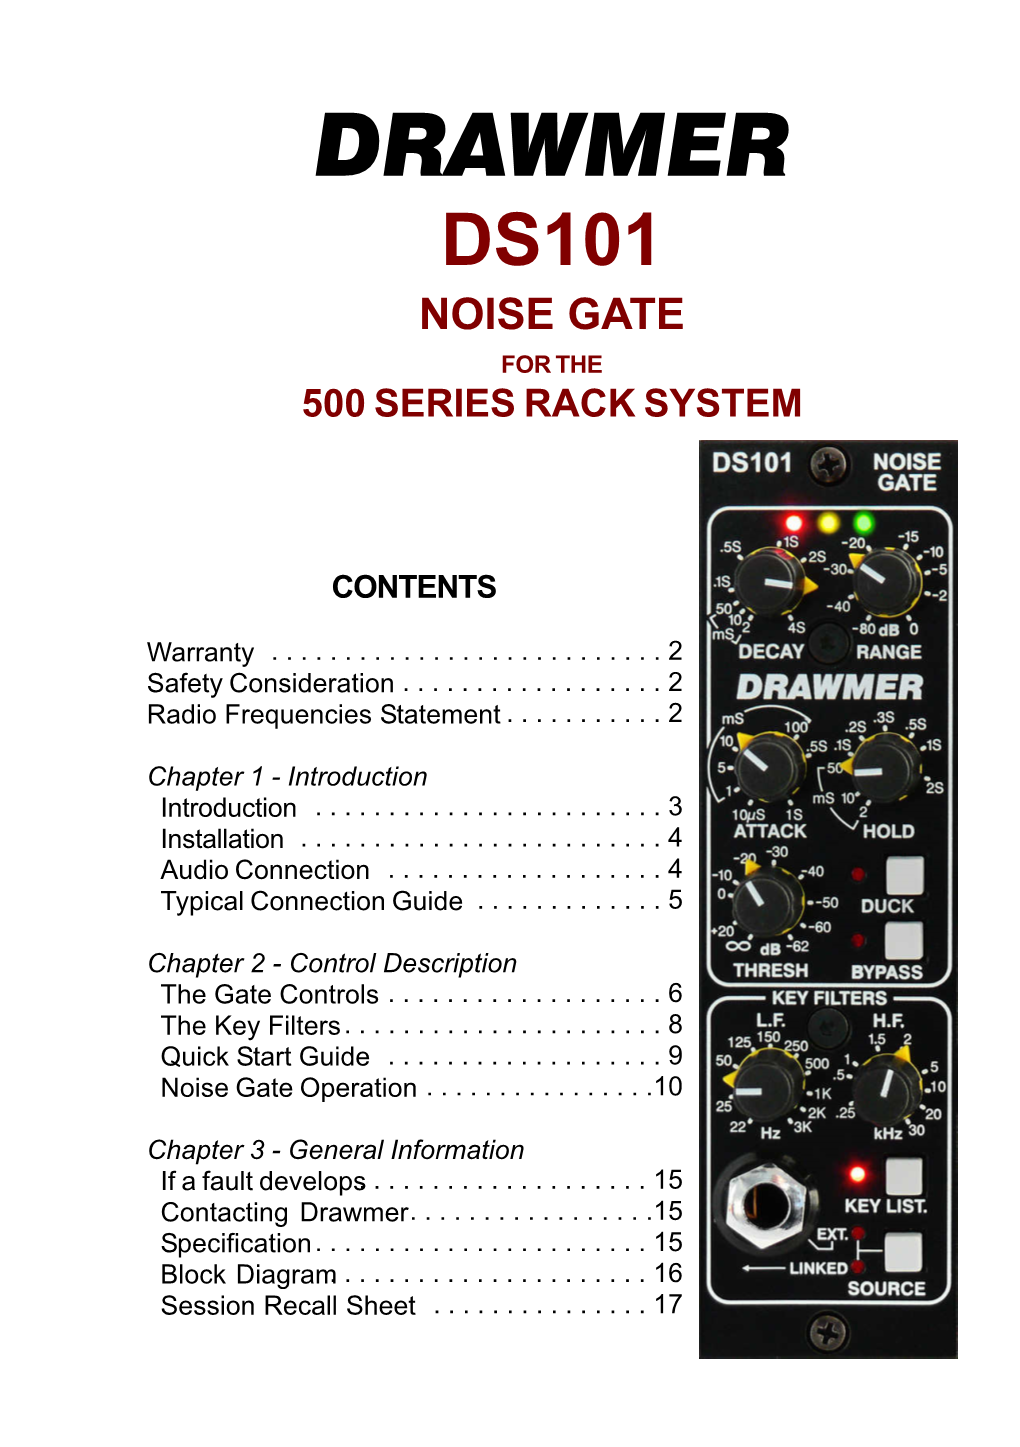 Ds101 Noise Gate for the 500 Series Rack System